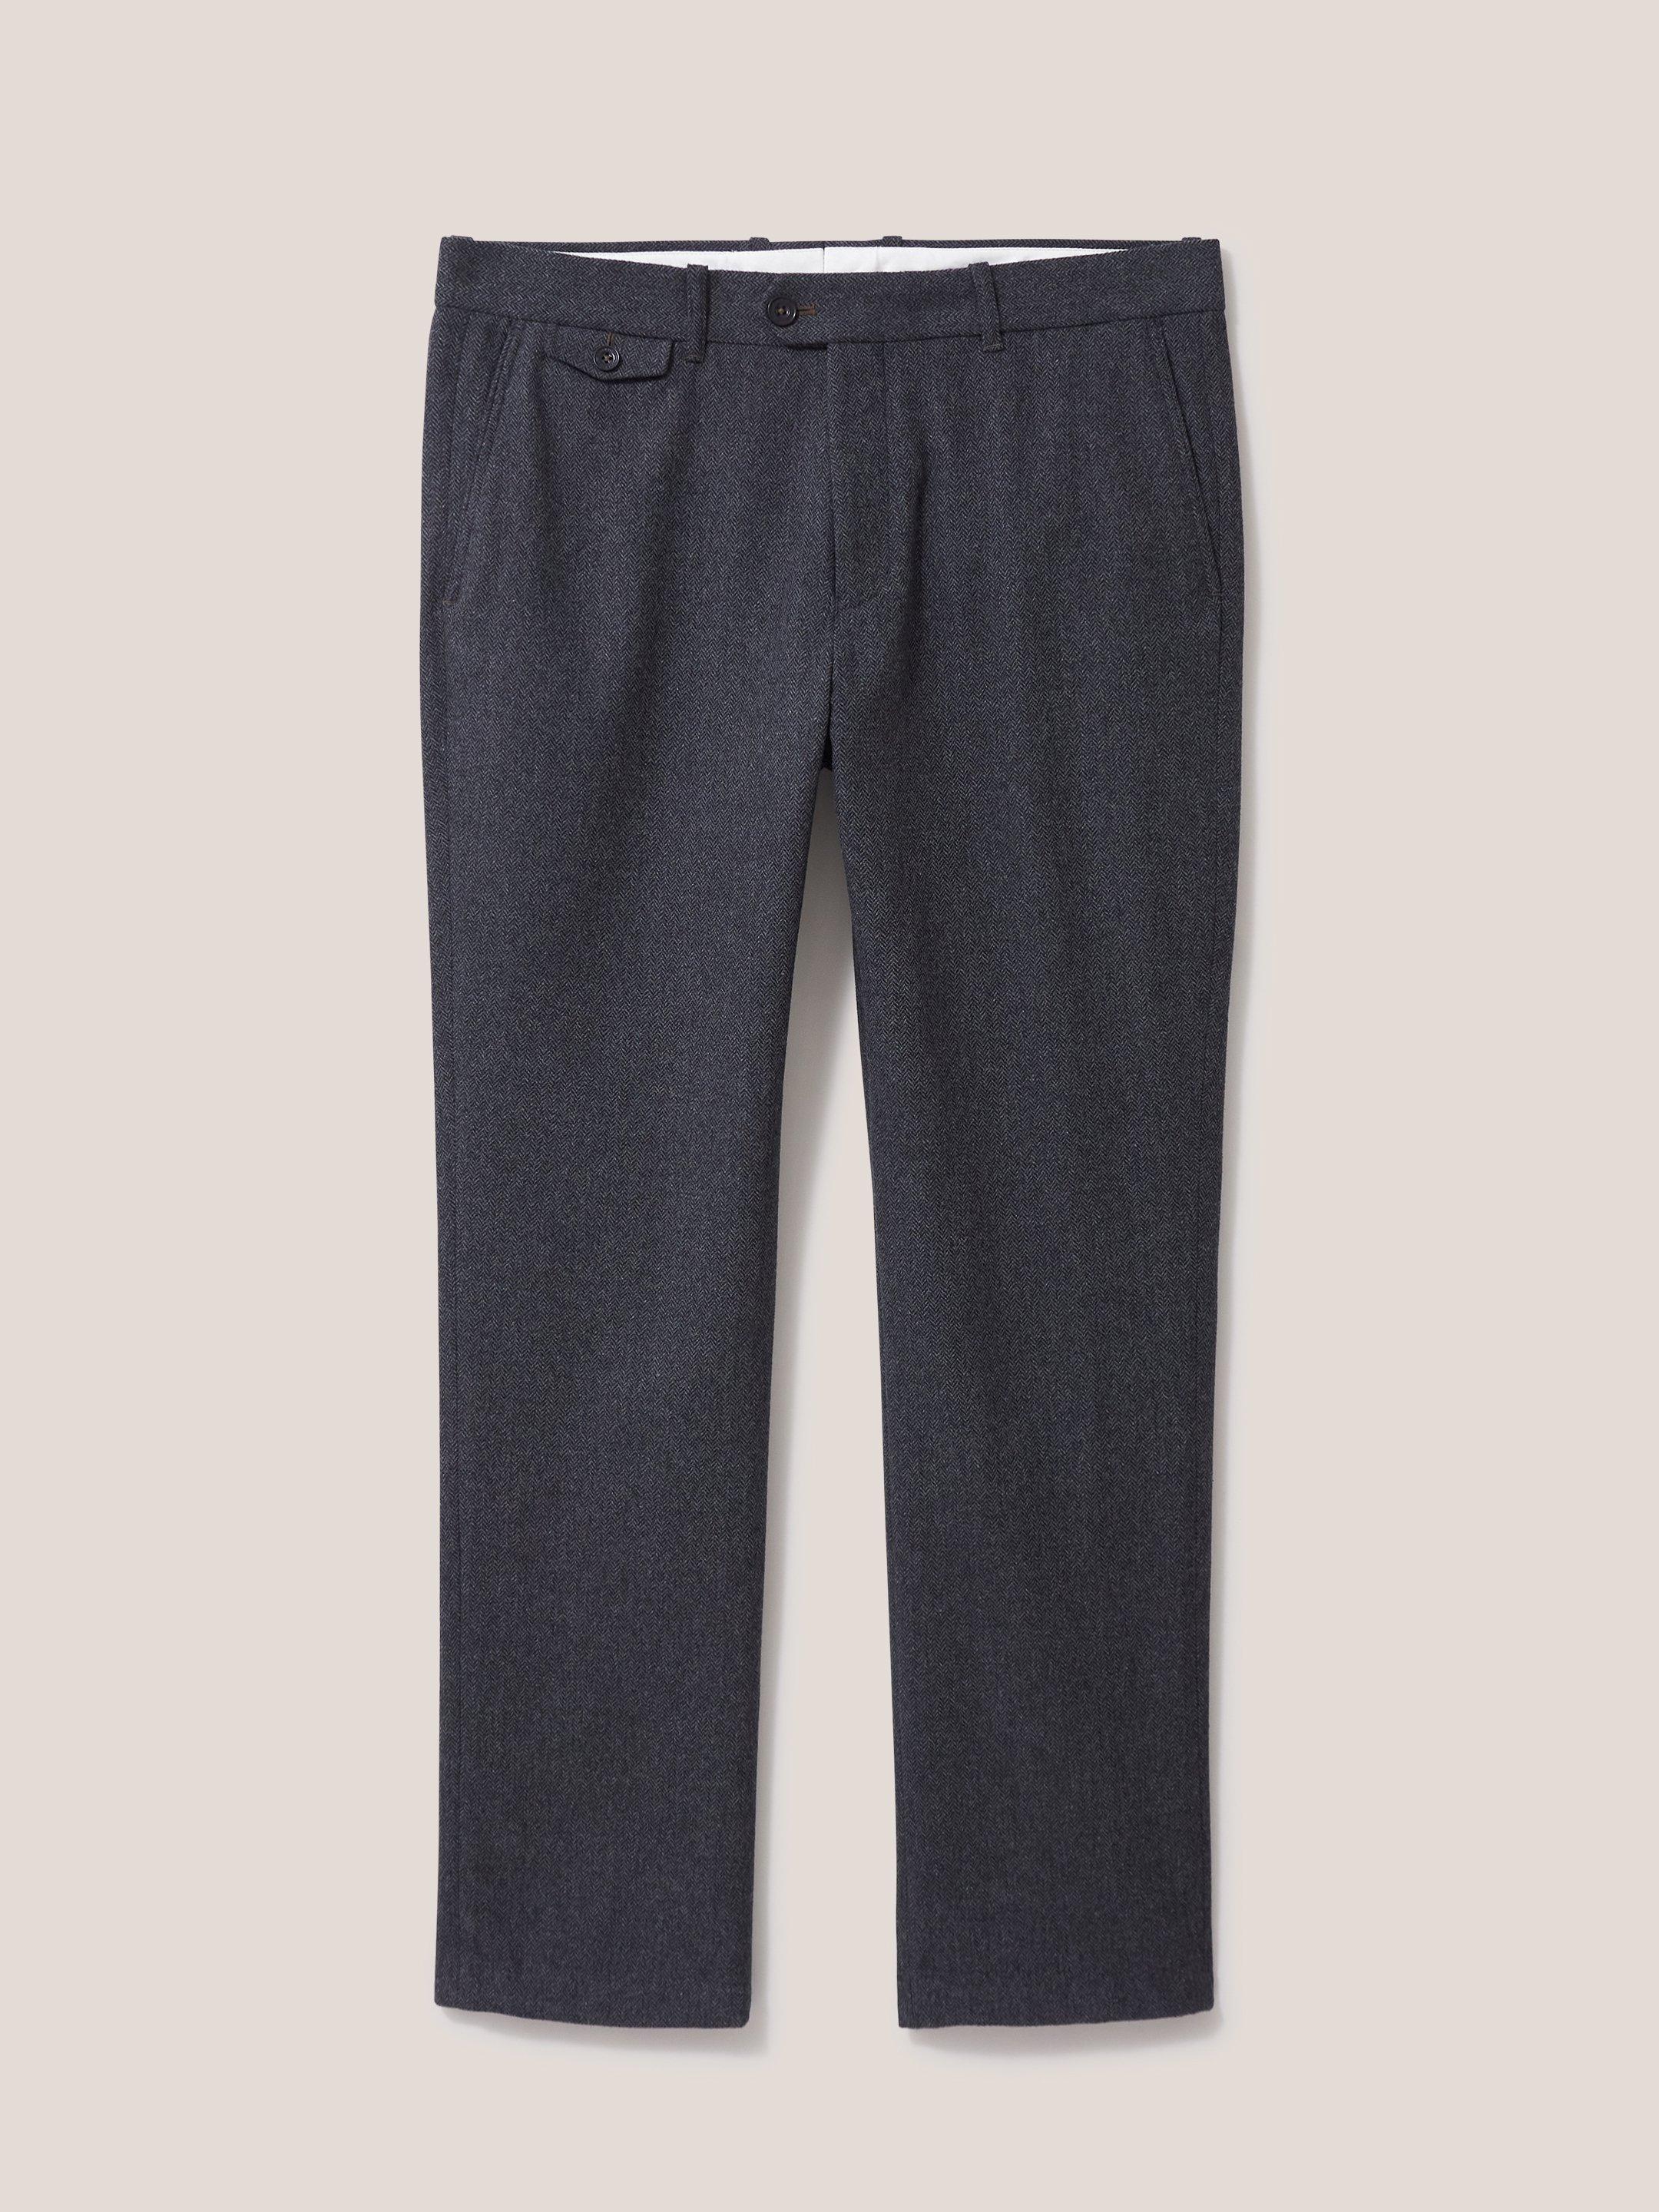 Heath Trouser in CHARC GREY - FLAT FRONT